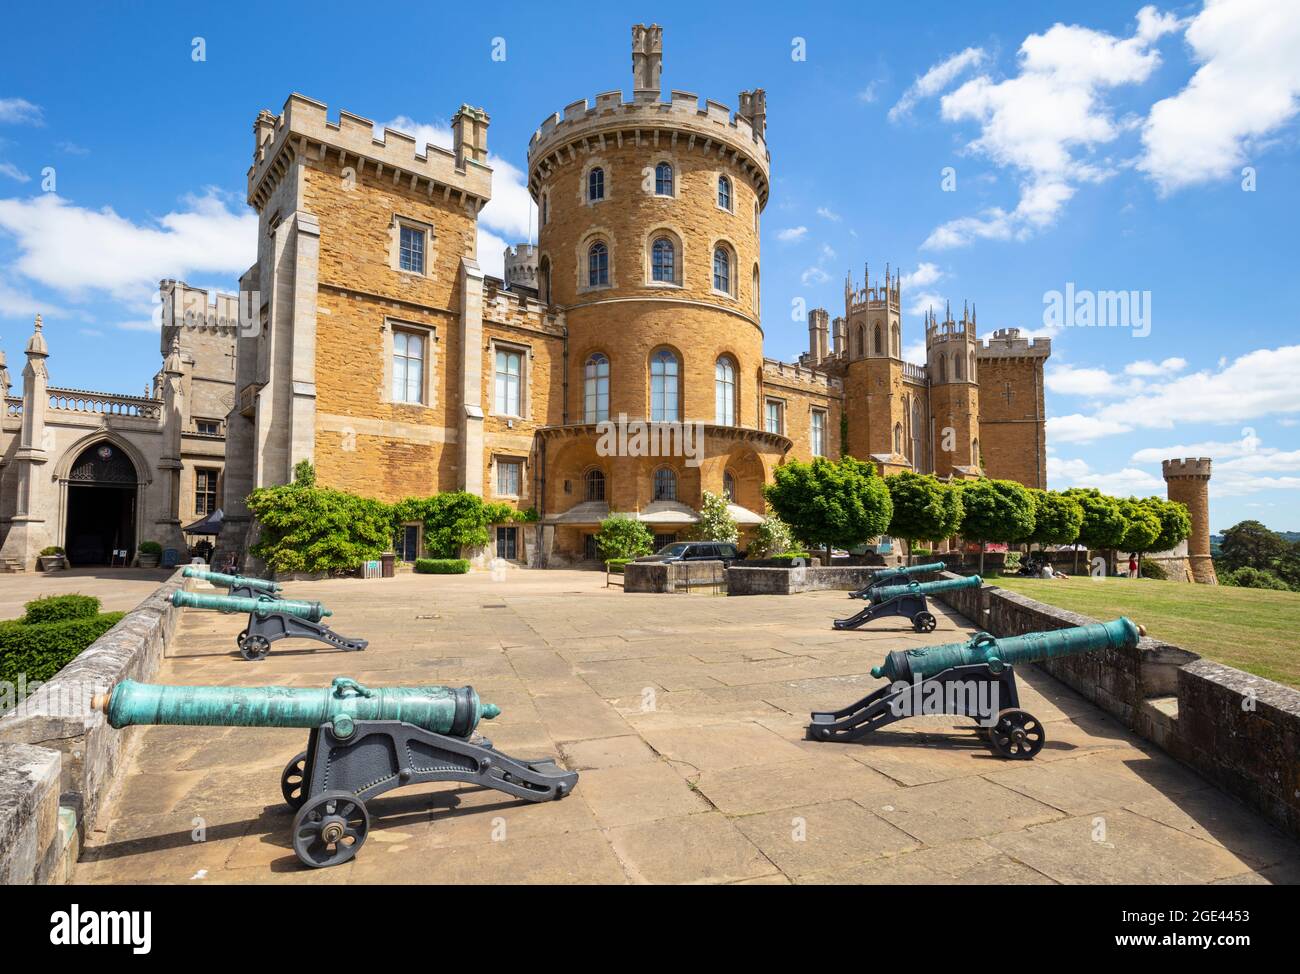 The Cannon Terrace Belvoir Castle Valle of Belvoir Grantham Leicestershire England GB Europa Stockfoto